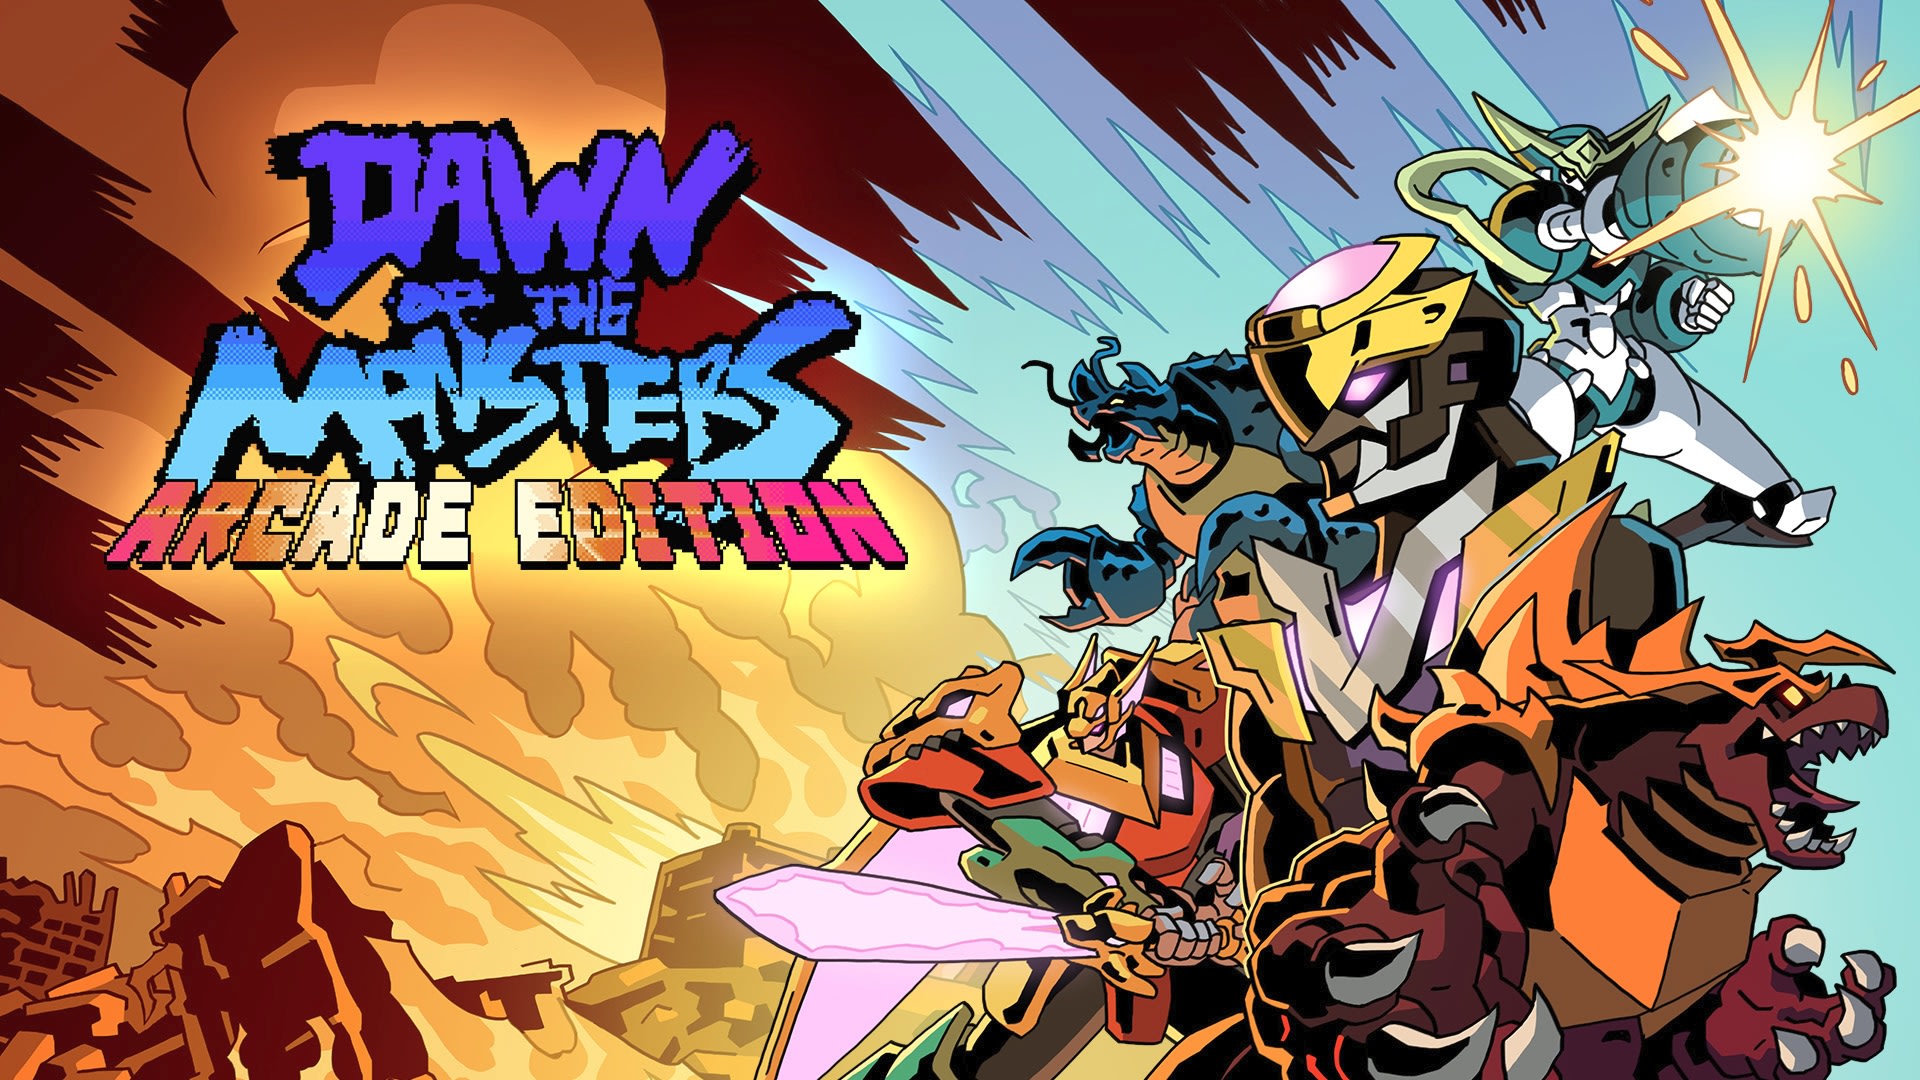 Dawn of the Monsters: Arcade + Character DLC Pack